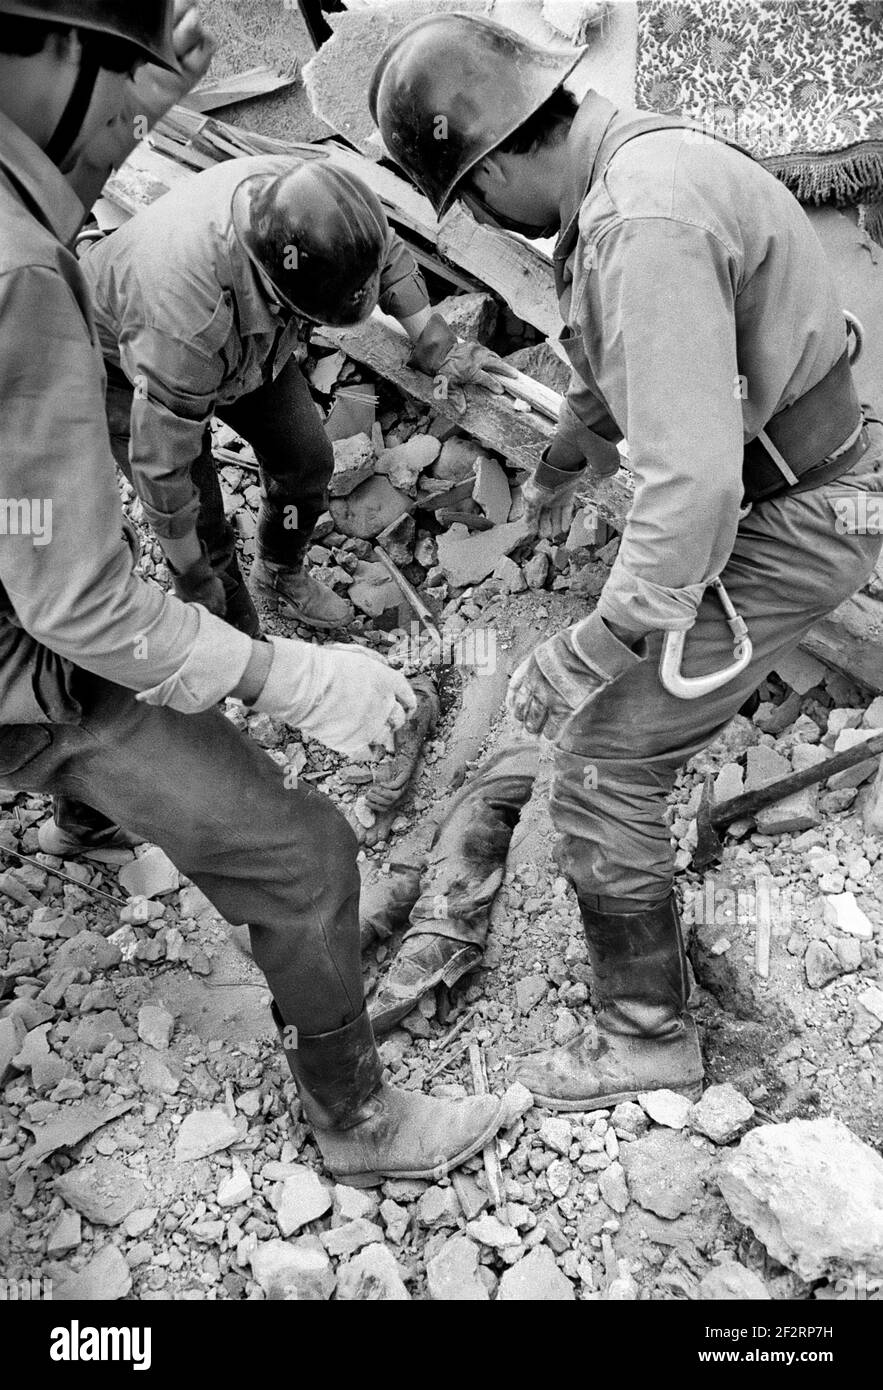 Earthquake in Friuli (Northern Italy), recovery of a victim's body in Osoppo (May 1976) Stock Photo